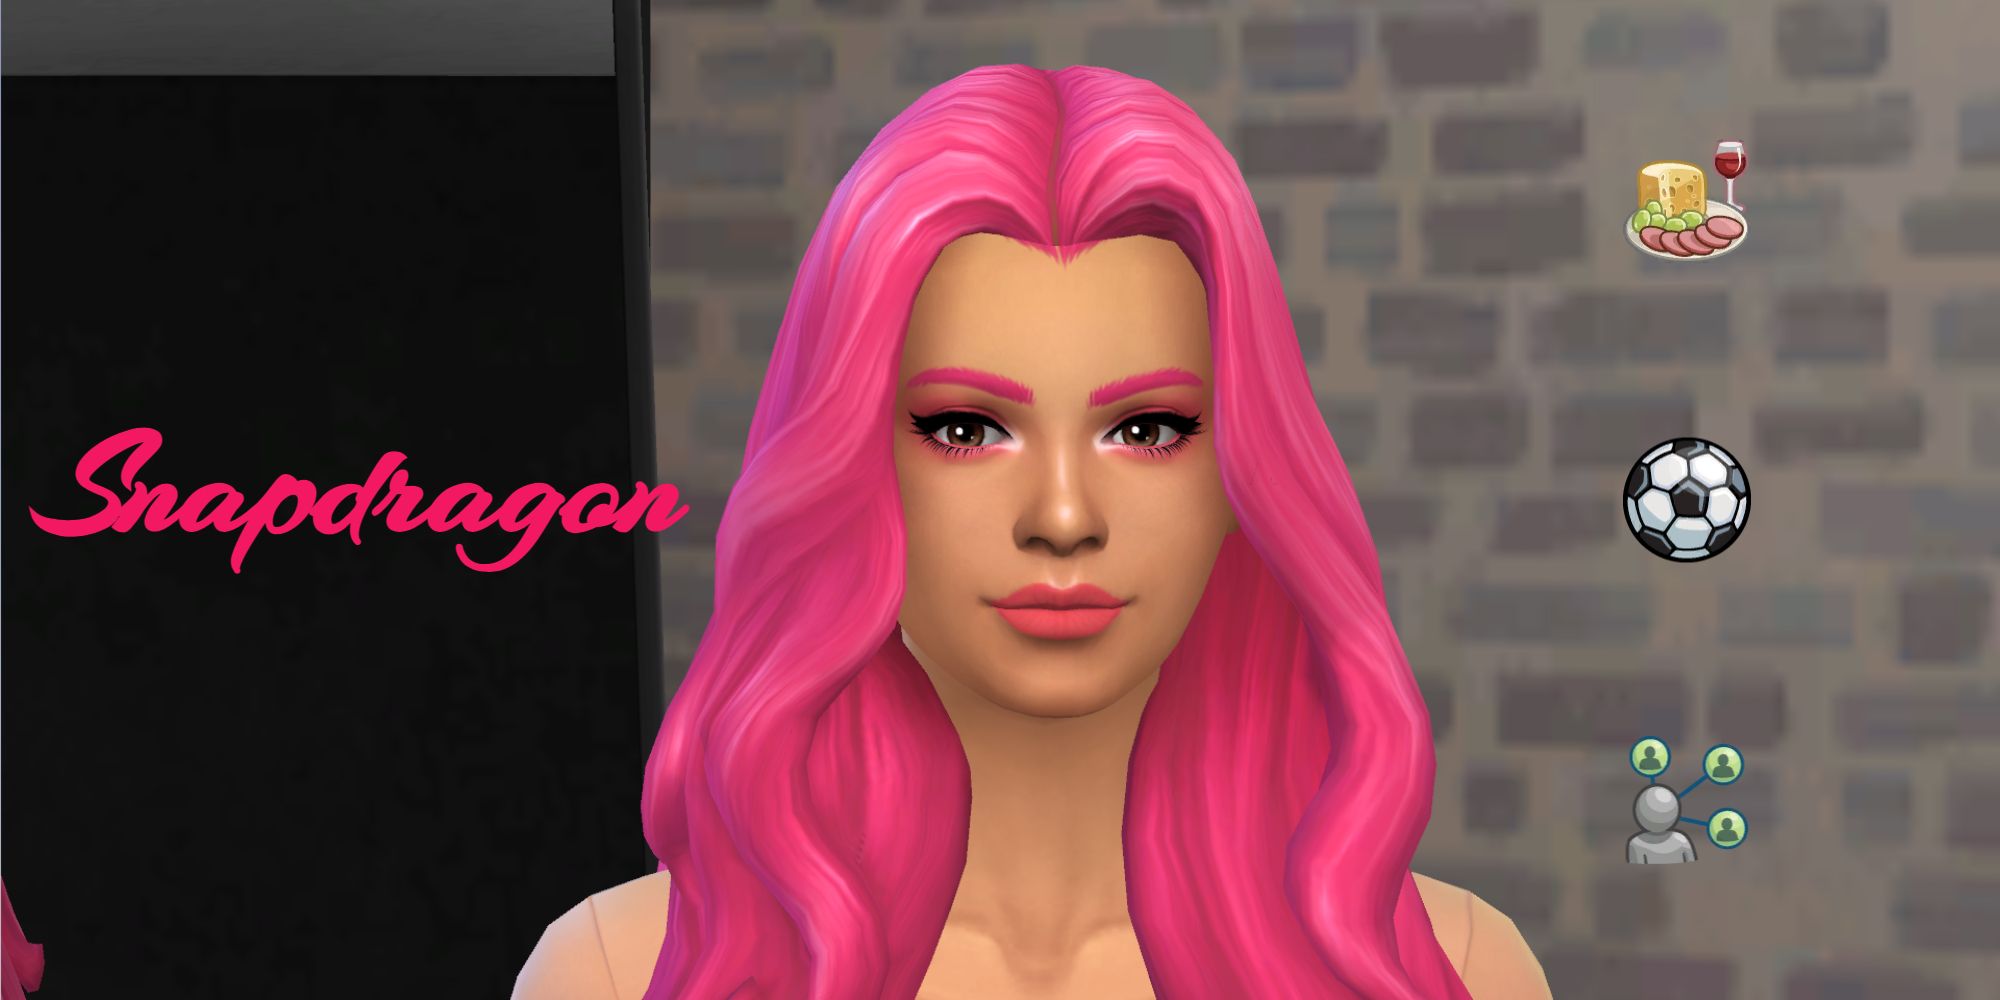 A hot pink-haired Sim from the snapdragon generation